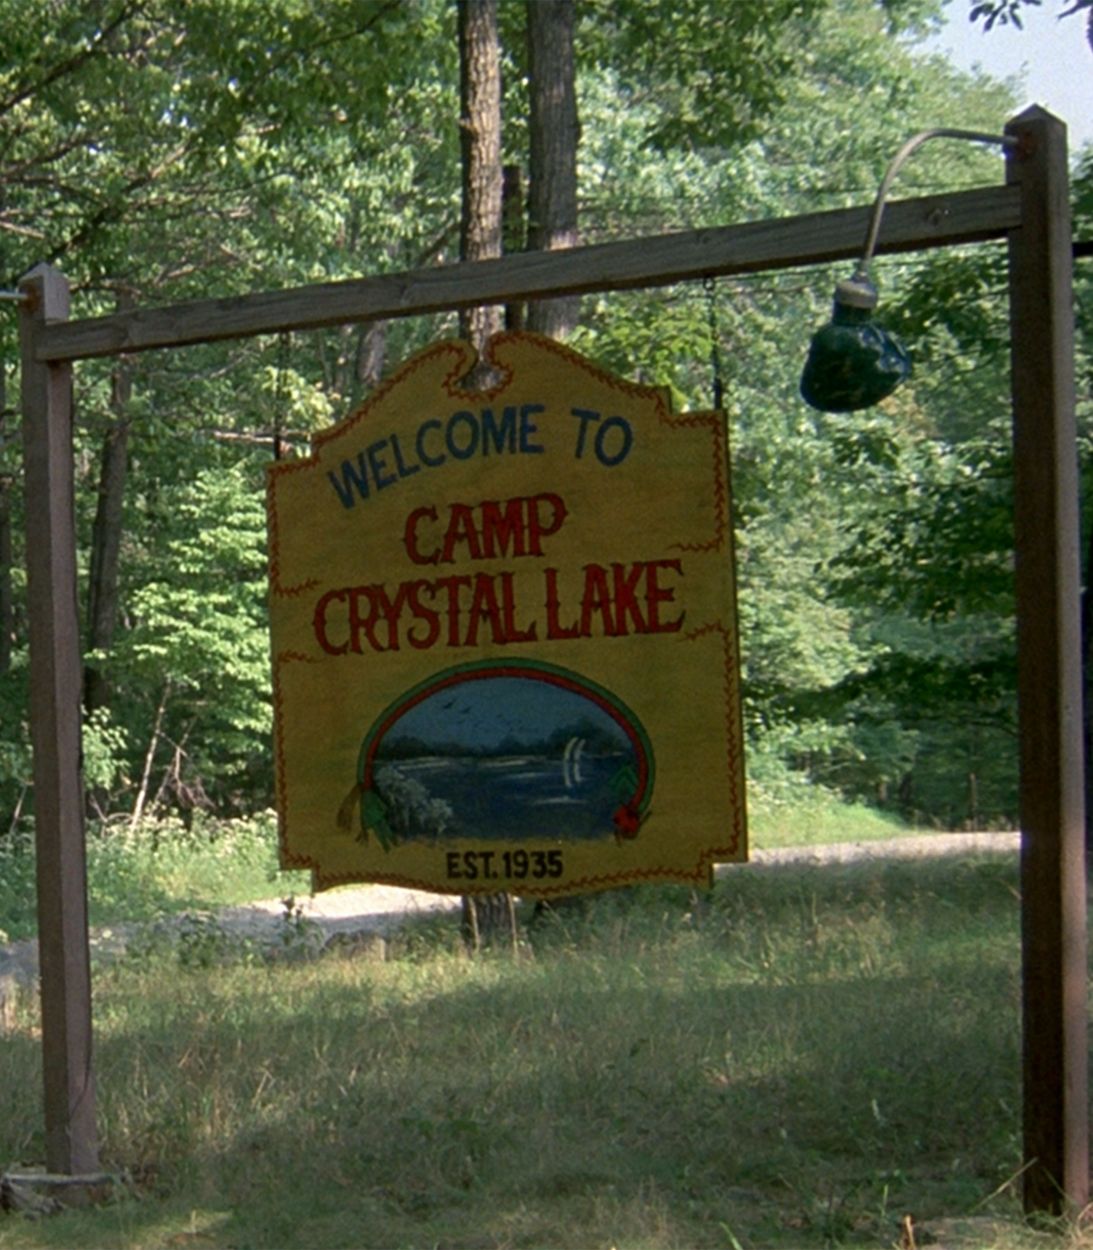 Friday the 13th Fan Brewed Beer Using Real Crystal Lake Water